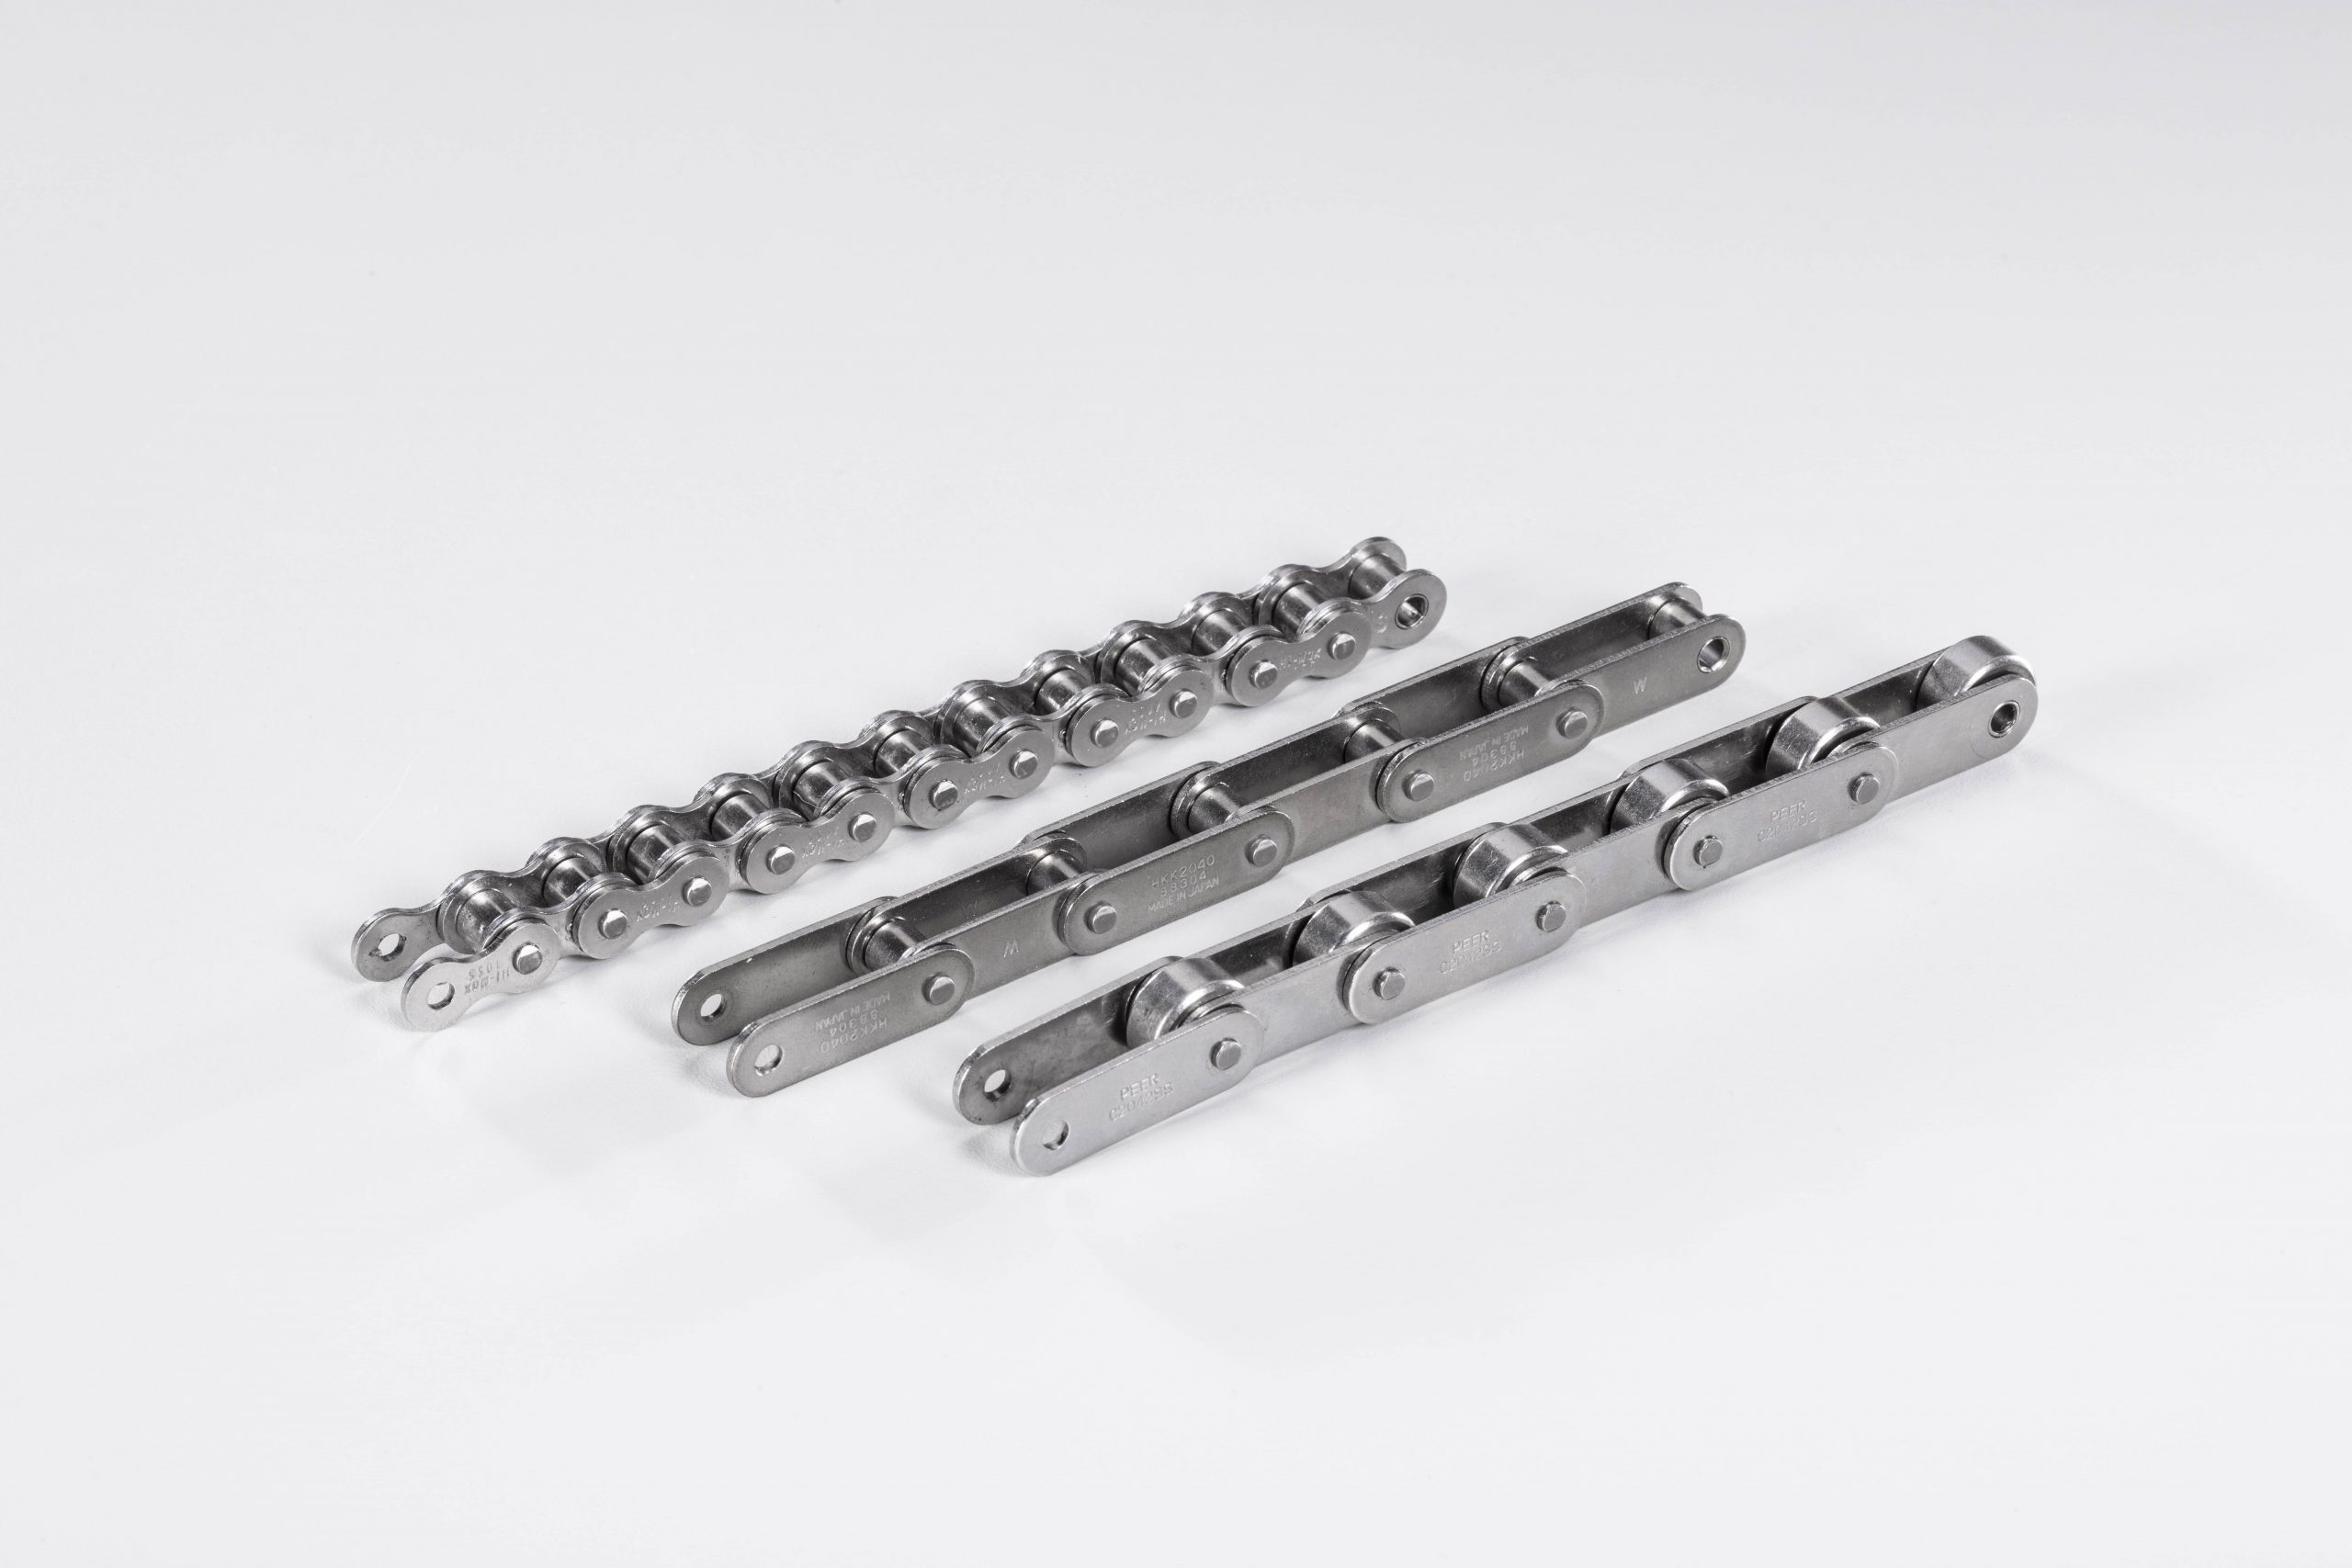 Chain edge examples for conveyor belts.